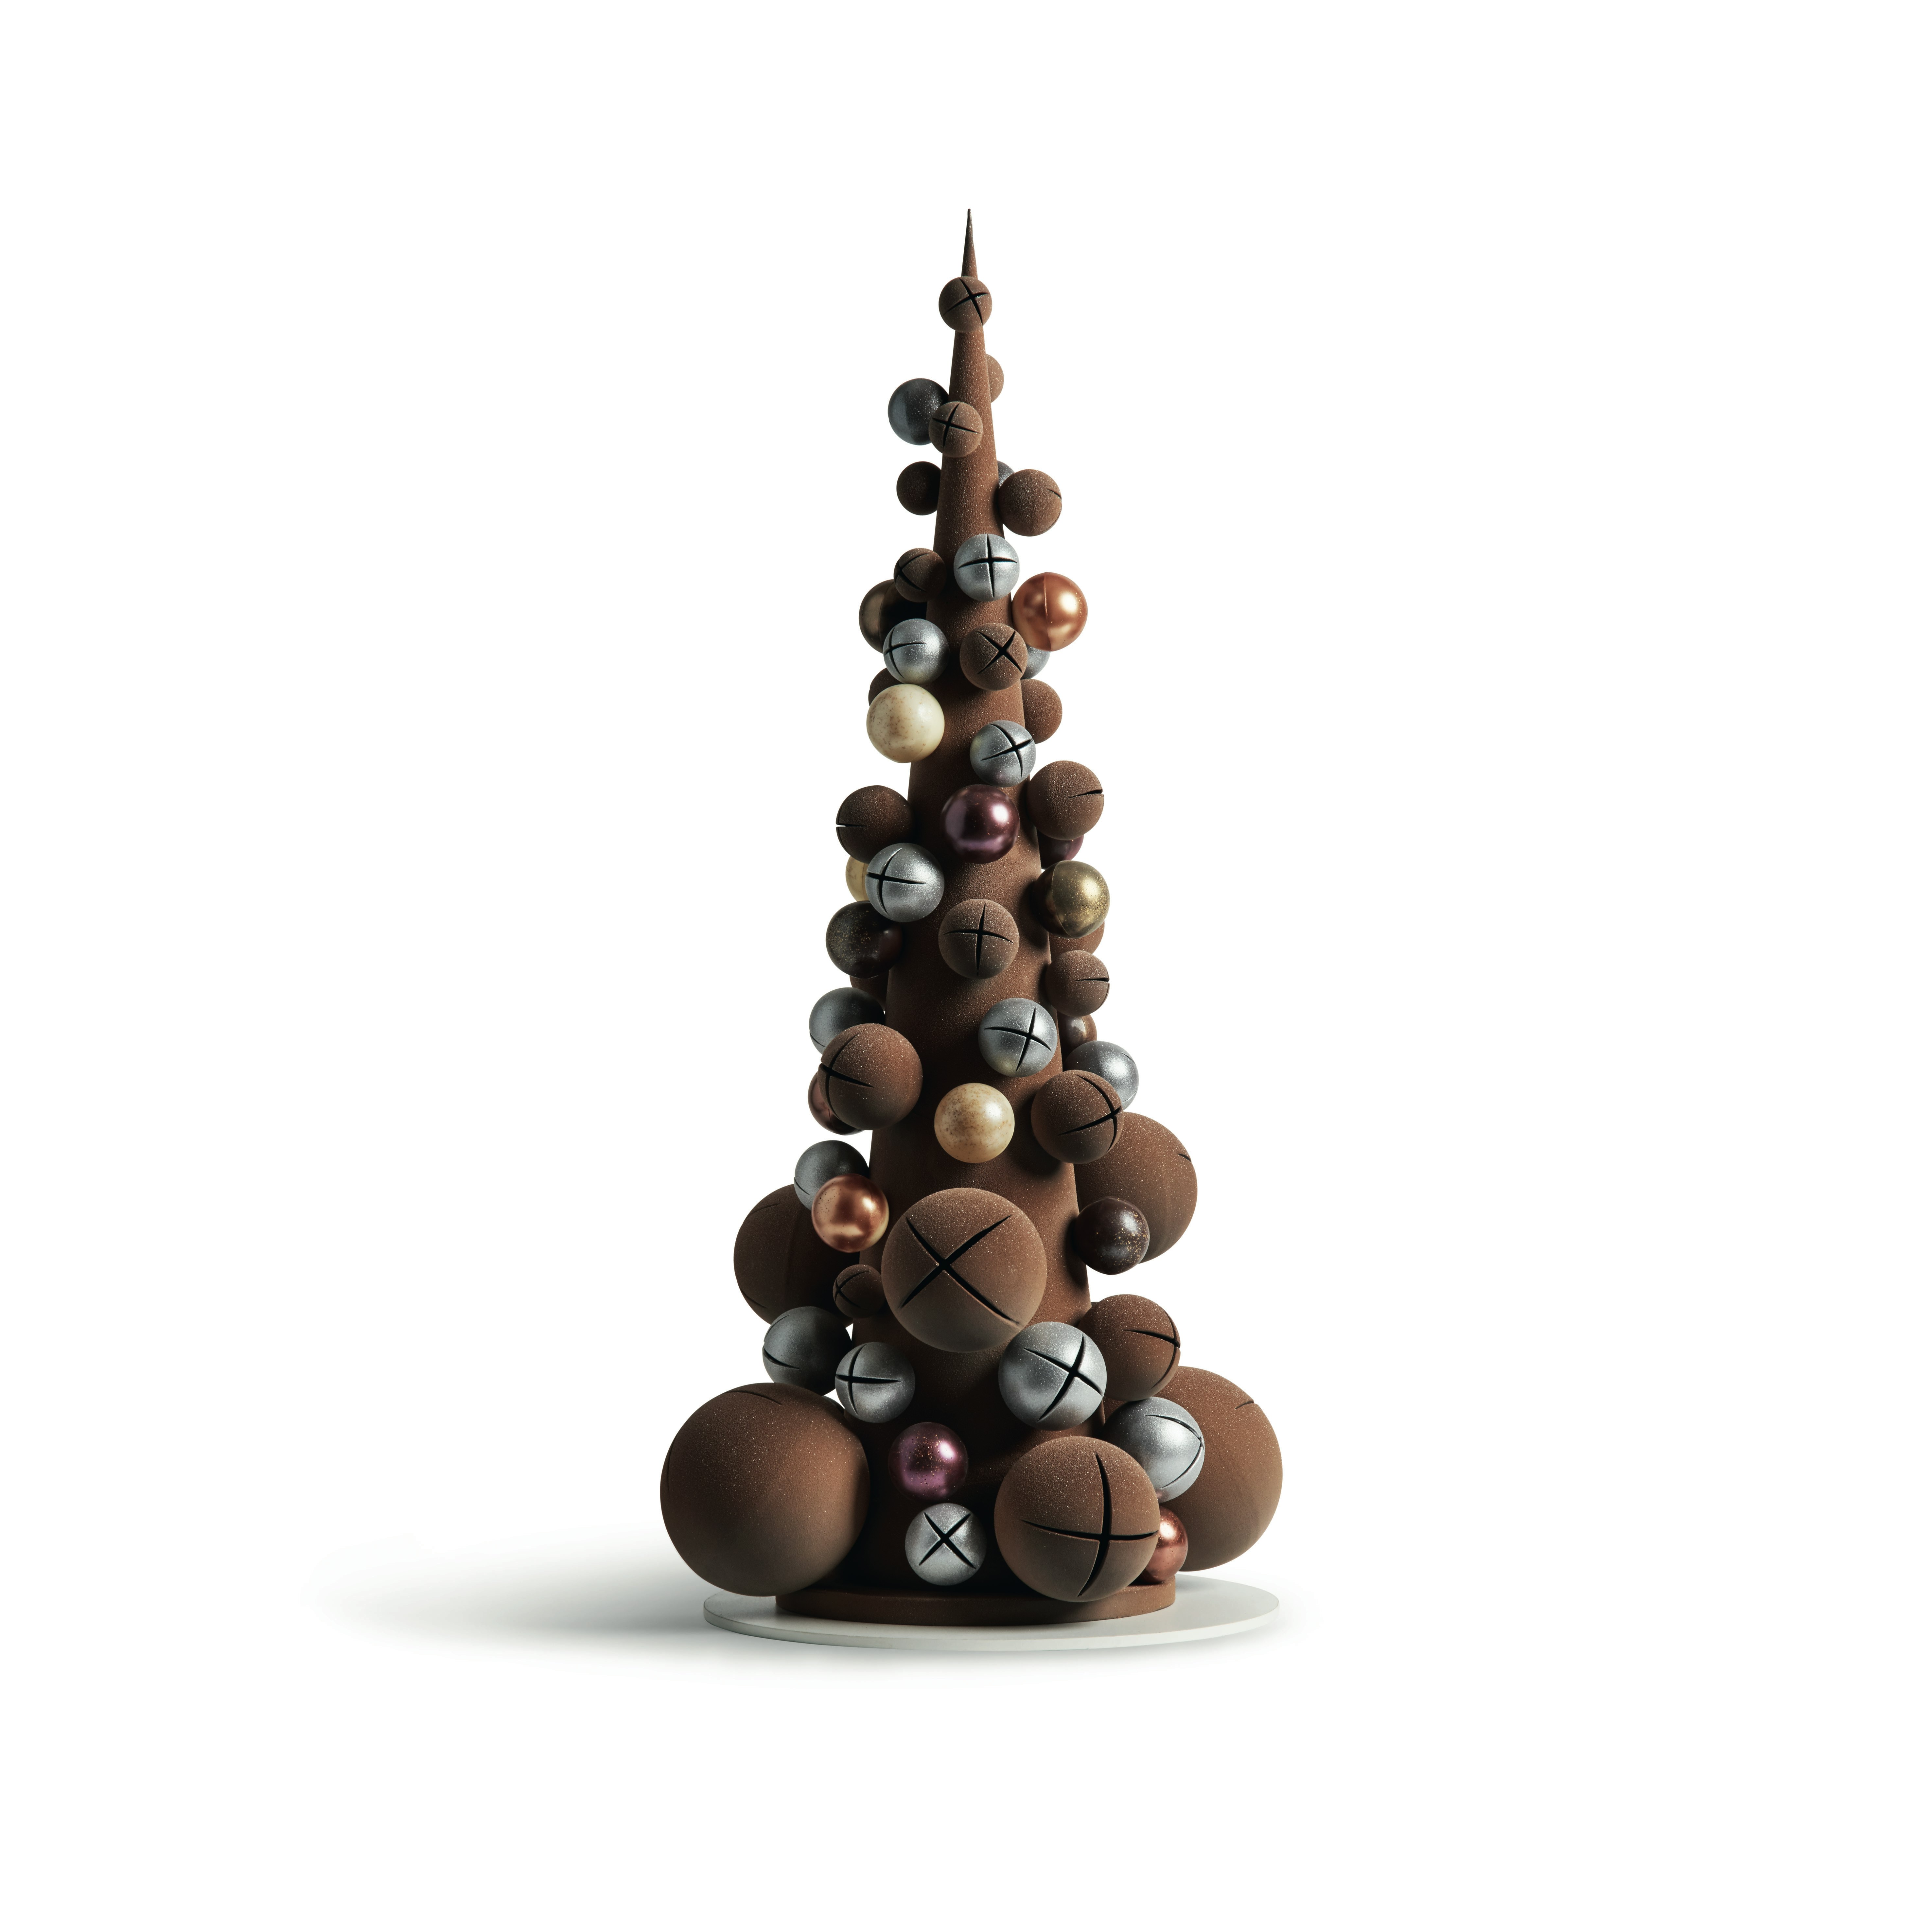 A tall, narrow Christmas tree constructed of chocolate balls and silver and gold jinglebells sits on a thin white platter against a white backdrop